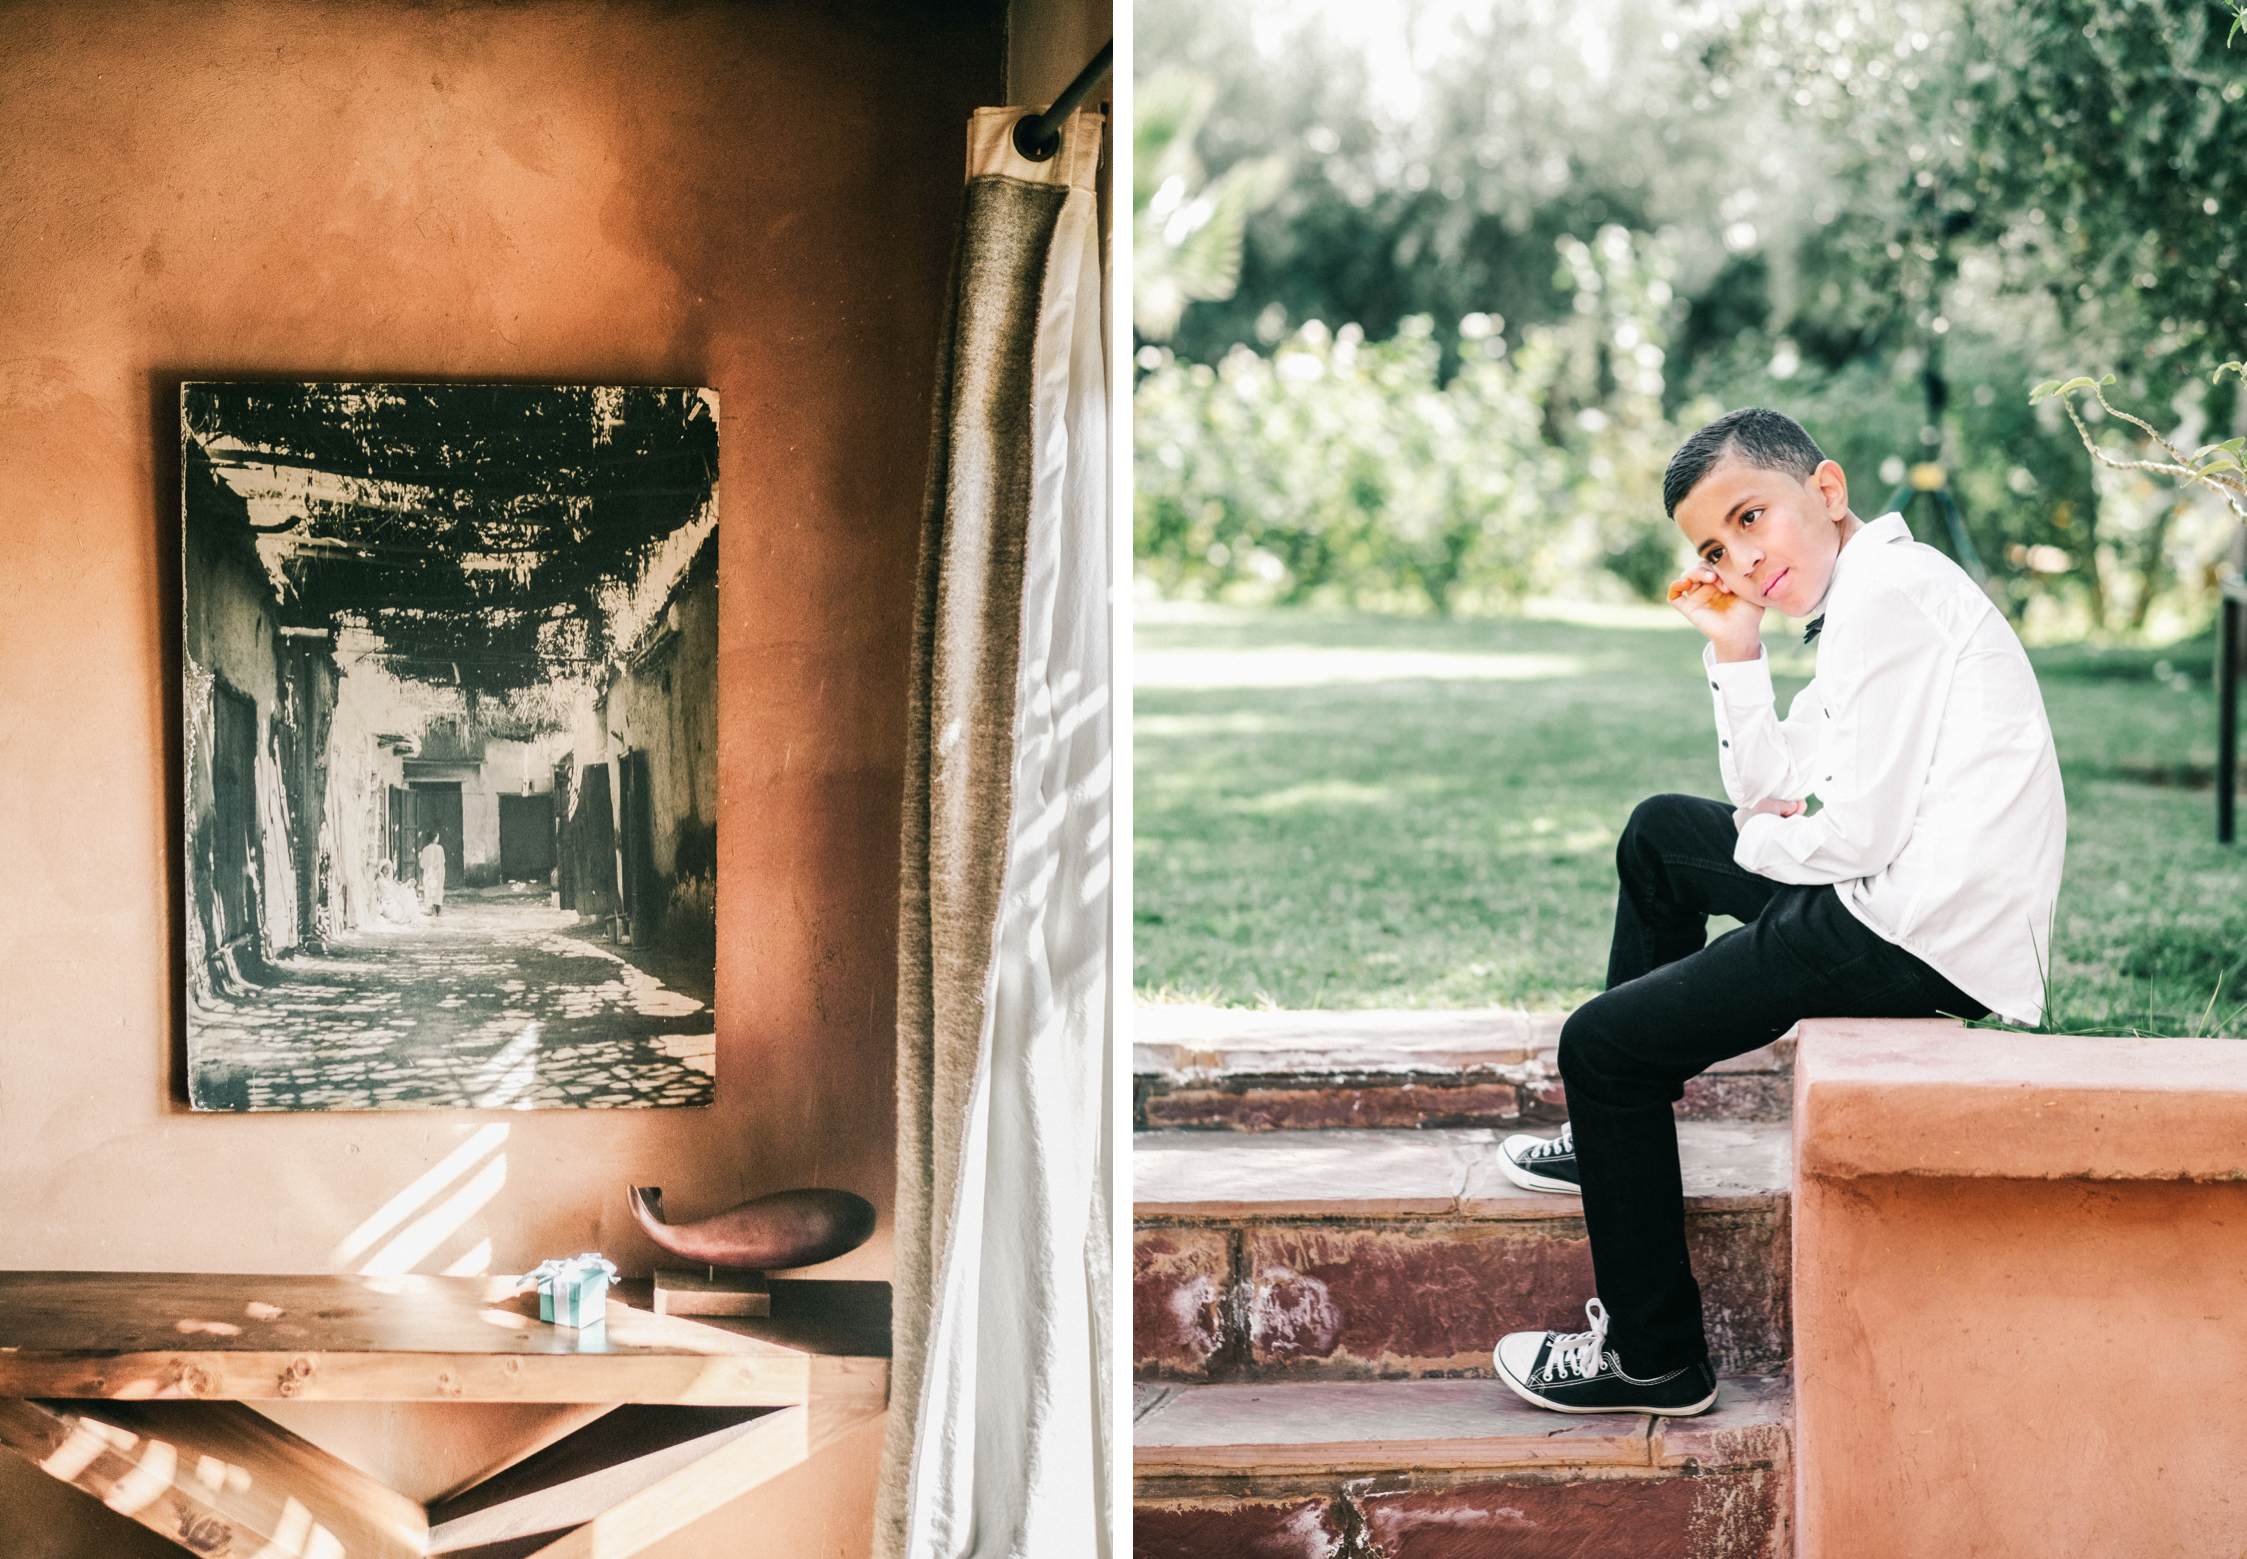 Wedding photographer Ourika Morocco - Getting ready location